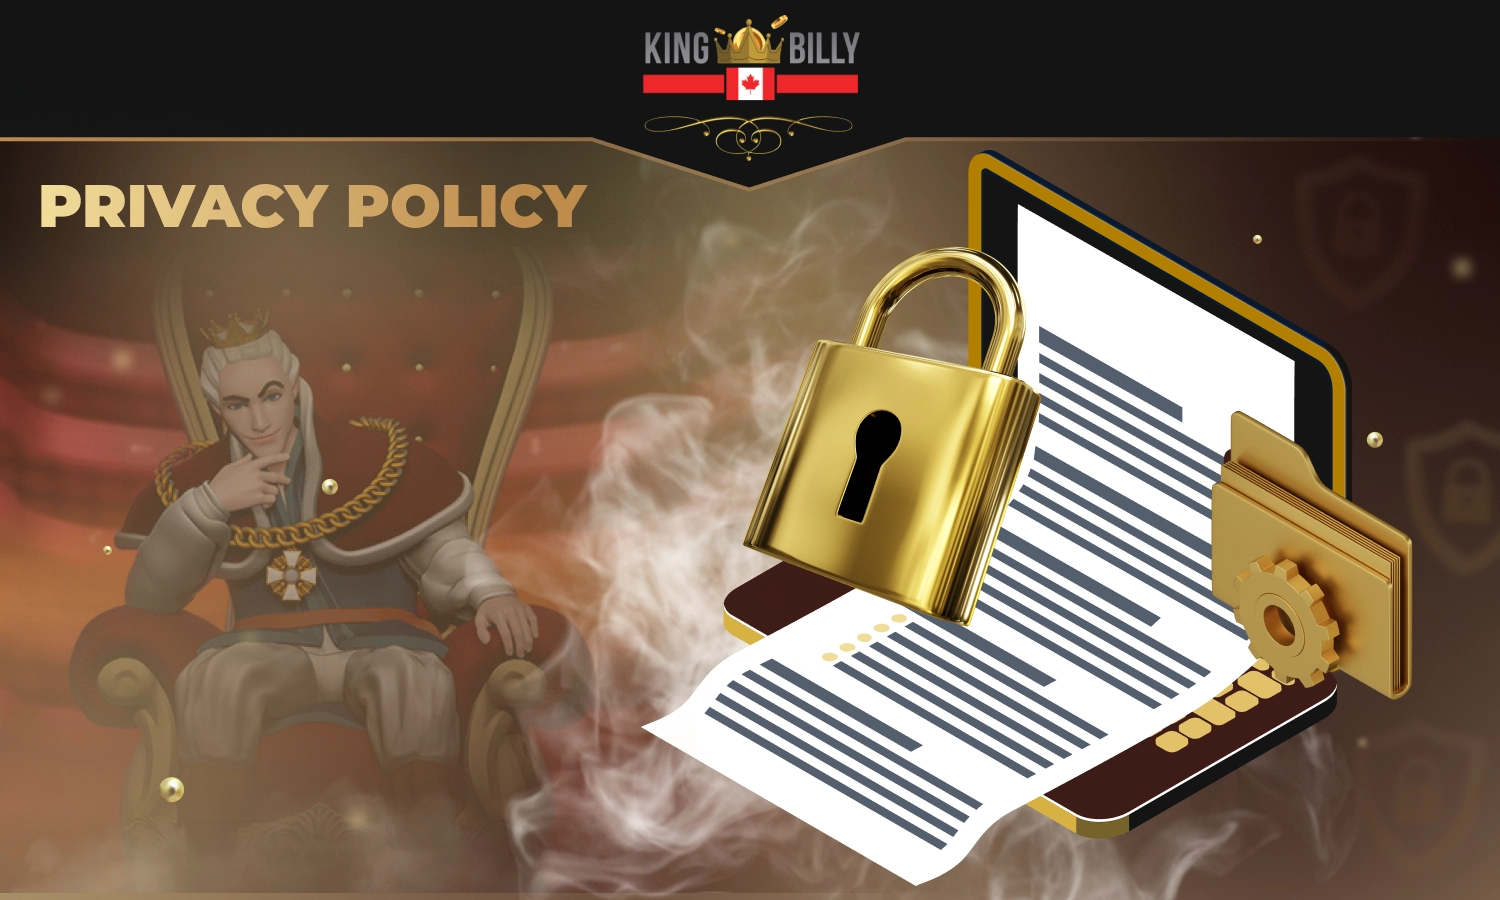 Casino King Billy Privacy Policy means all regulations and rules regarding Сanadian user information that the company collects and processes